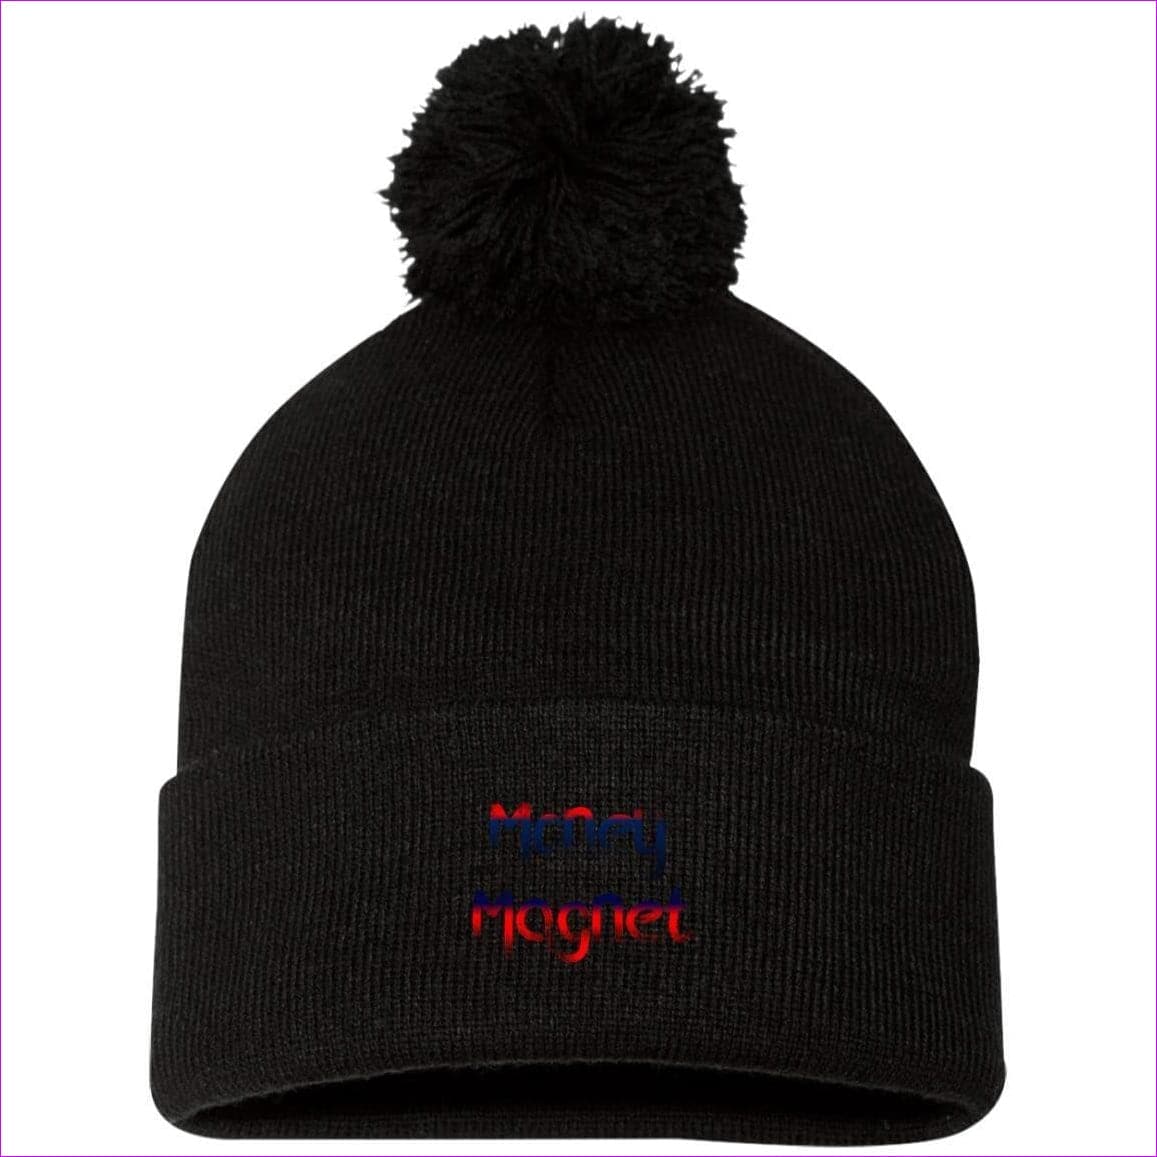 SP15 Pom Pom Knit Cap Black One Size - Money Magnet Embroidered Knit Cap, Cap, Beanie - Beanie at TFC&H Co.